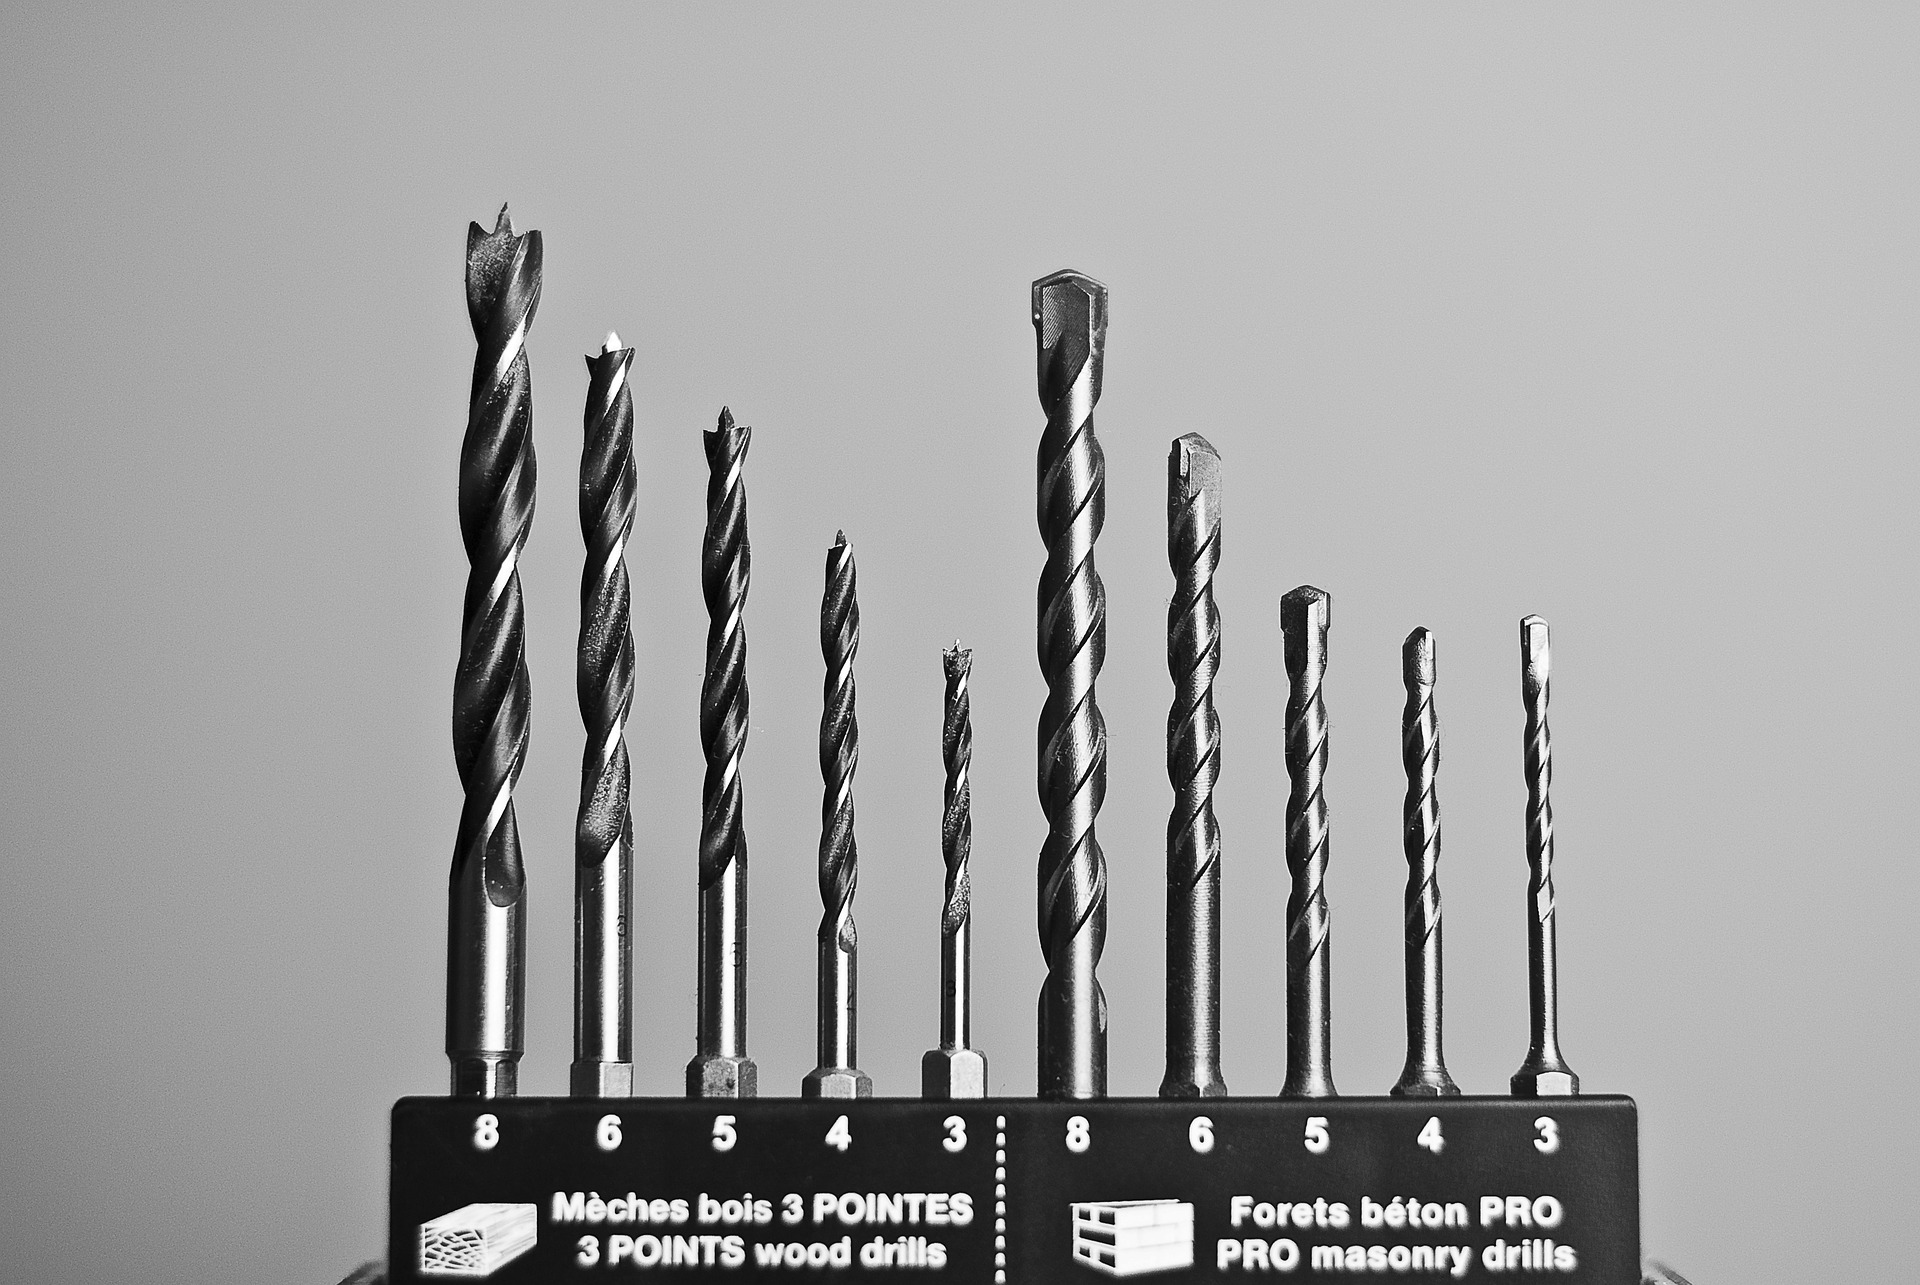 Big-Tools-Australia-Understanding-Drill-Bits-Types-Uses-and-Materials